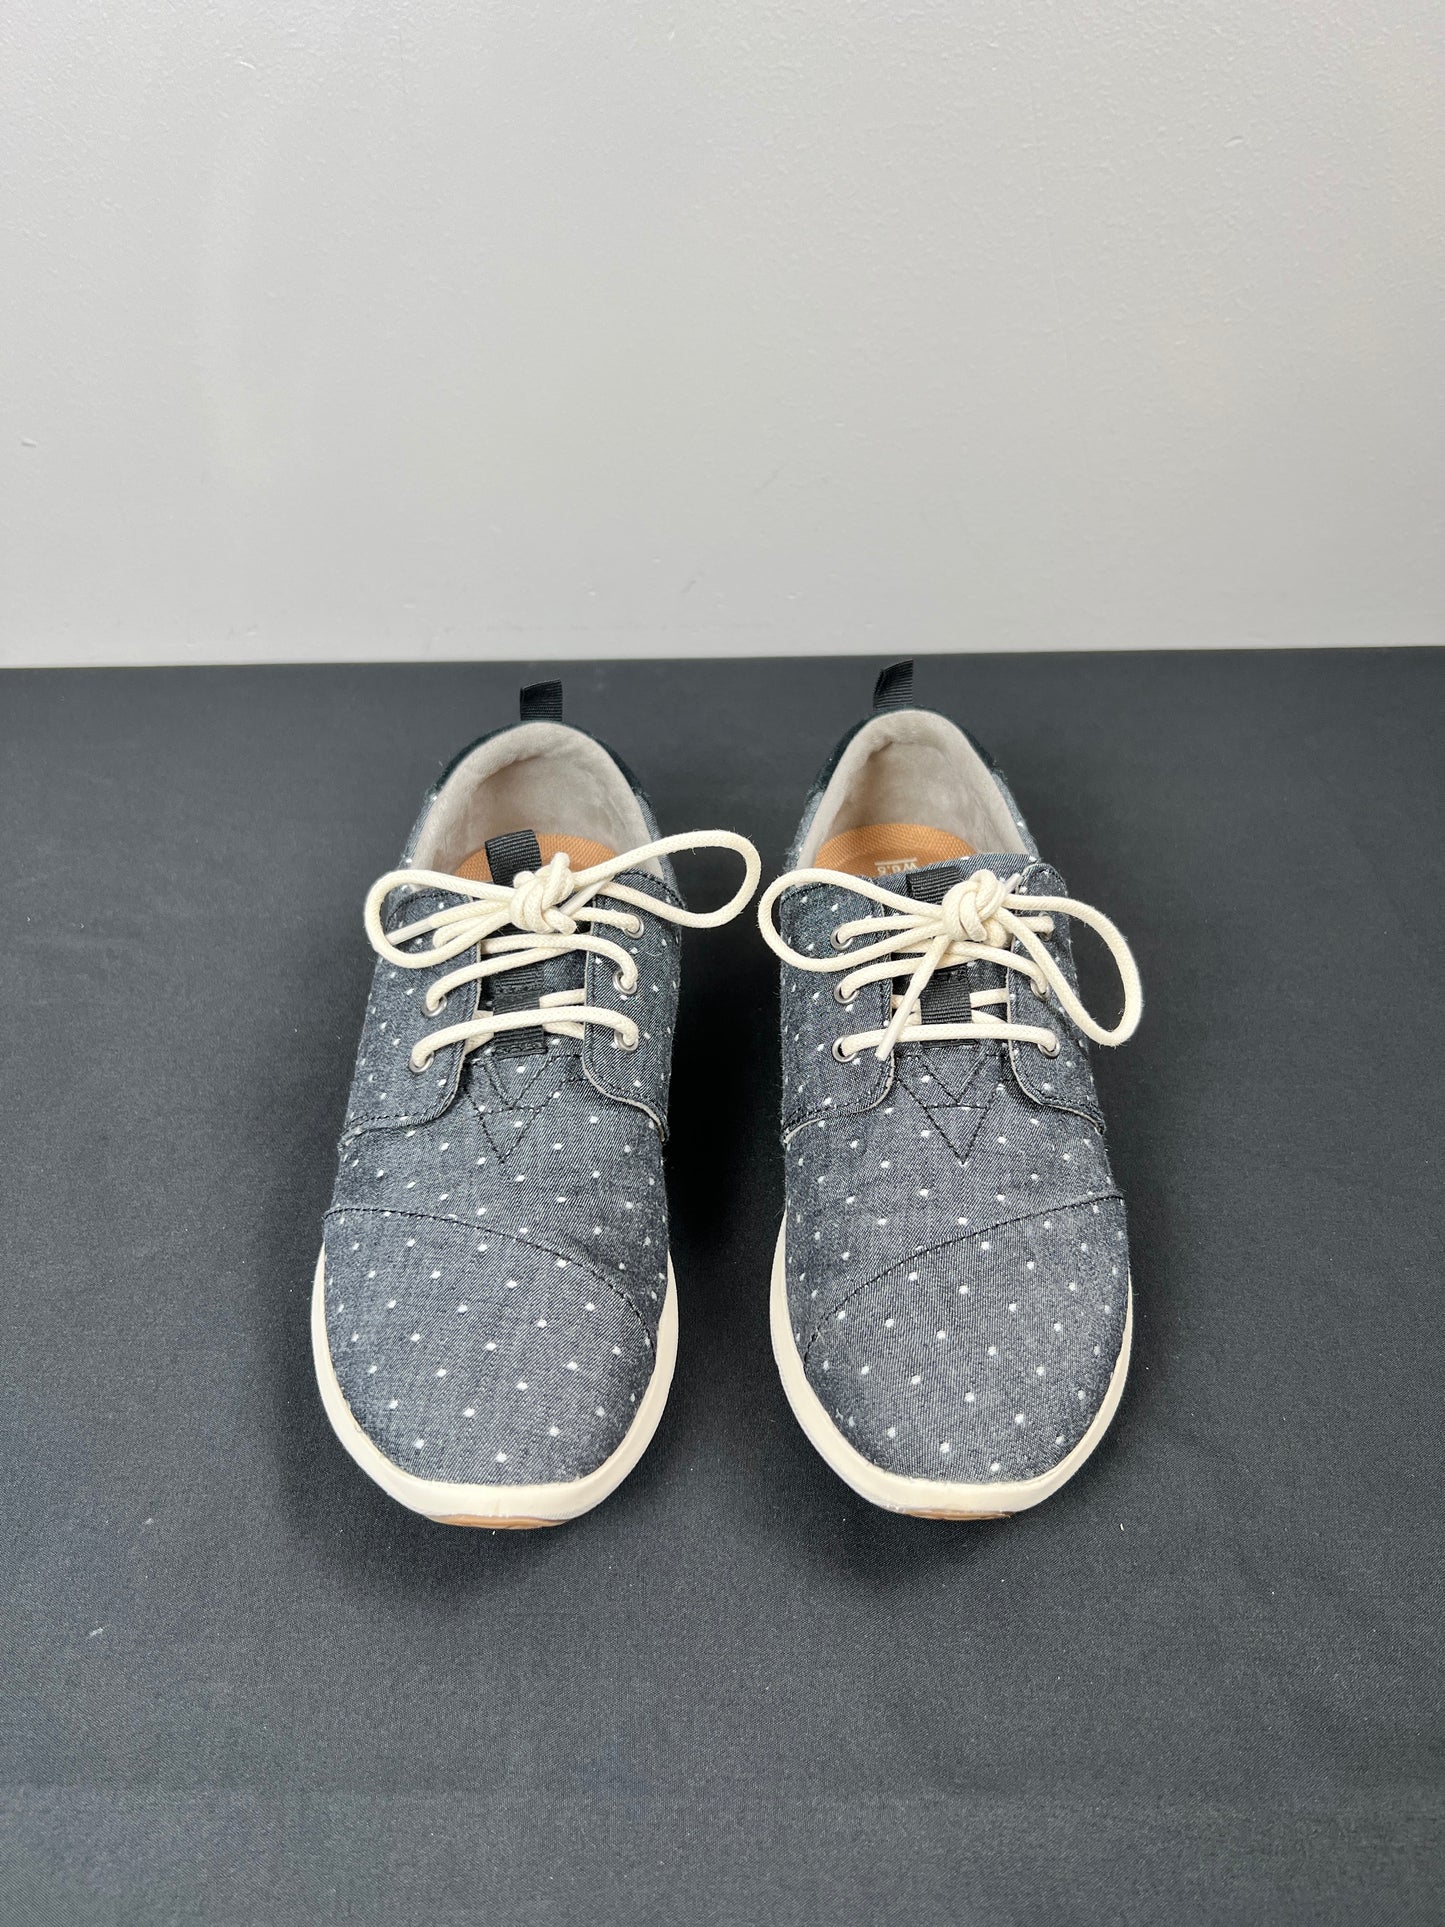 Shoes Flats Oxfords & Loafers By Toms  Size: 6.5